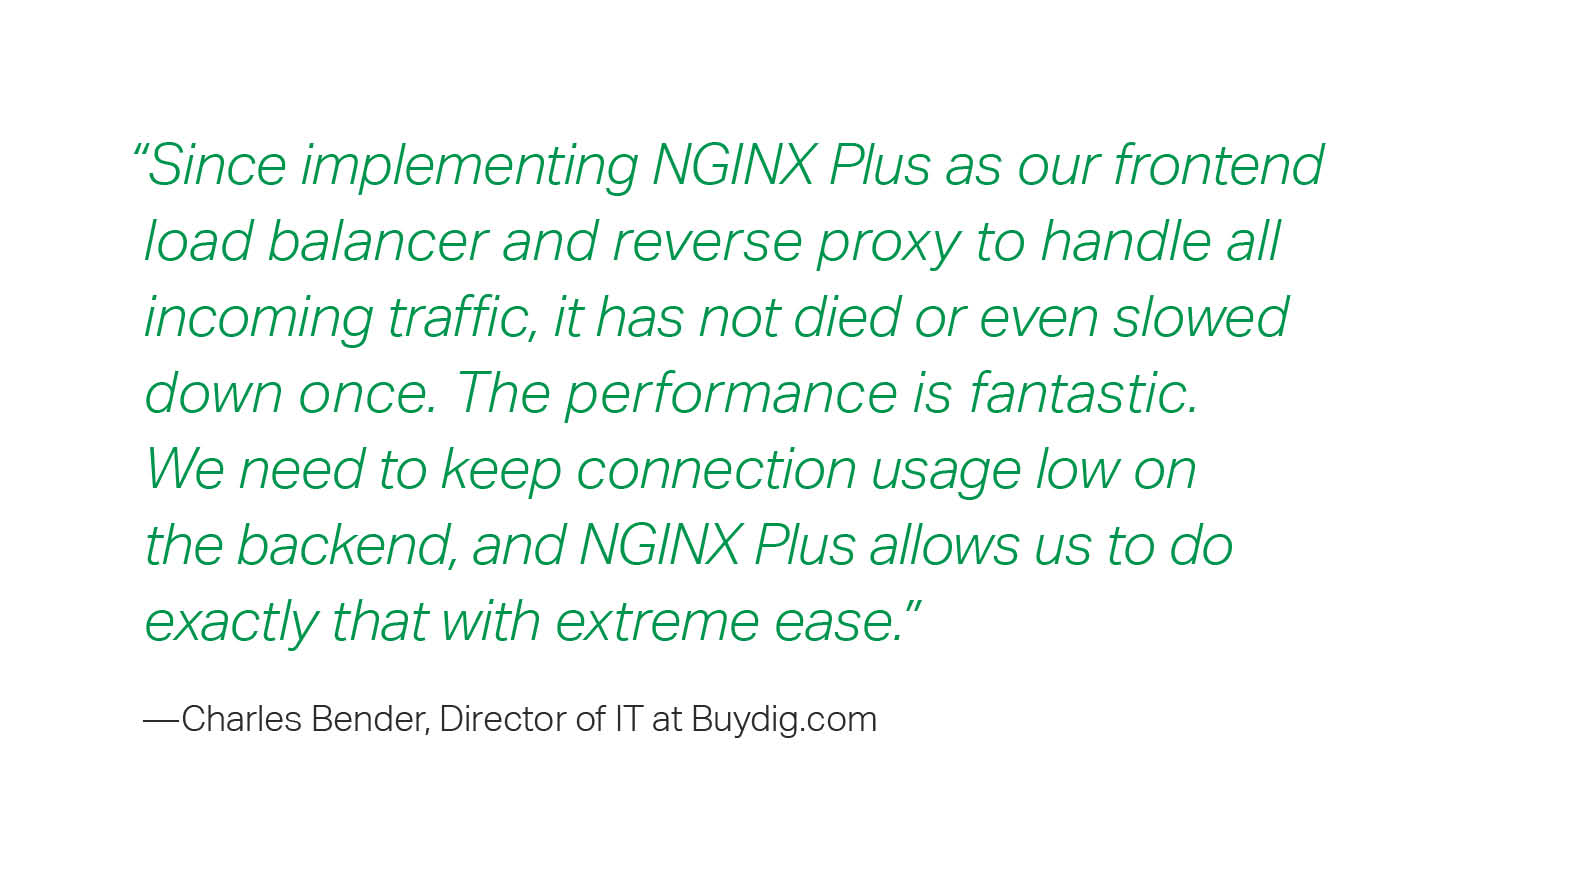 “Since implementing NGINX Plus as our frontend load balancer and reverse proxy to handle all incoming traffic, it has not died or even slowed down once. The performance is fantastic. We need to keep connection usage low on the backend, and NGINX Plus allows us to do exactly that with extreme ease.”  – Charles Bender, Director of IT at Buydig.com